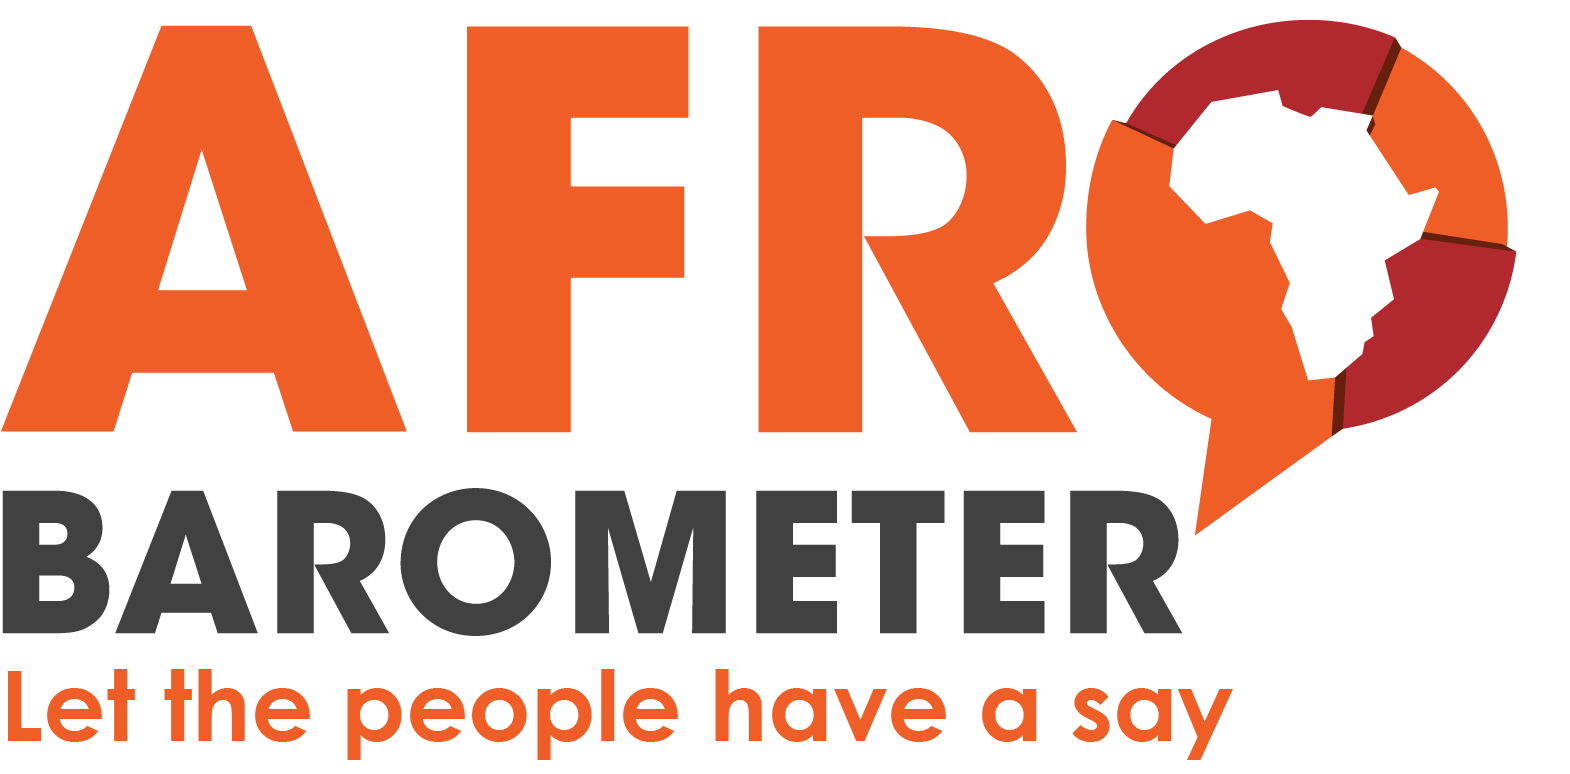 Afrobarometer unveils insights on elections, climate change, and governance at press conference